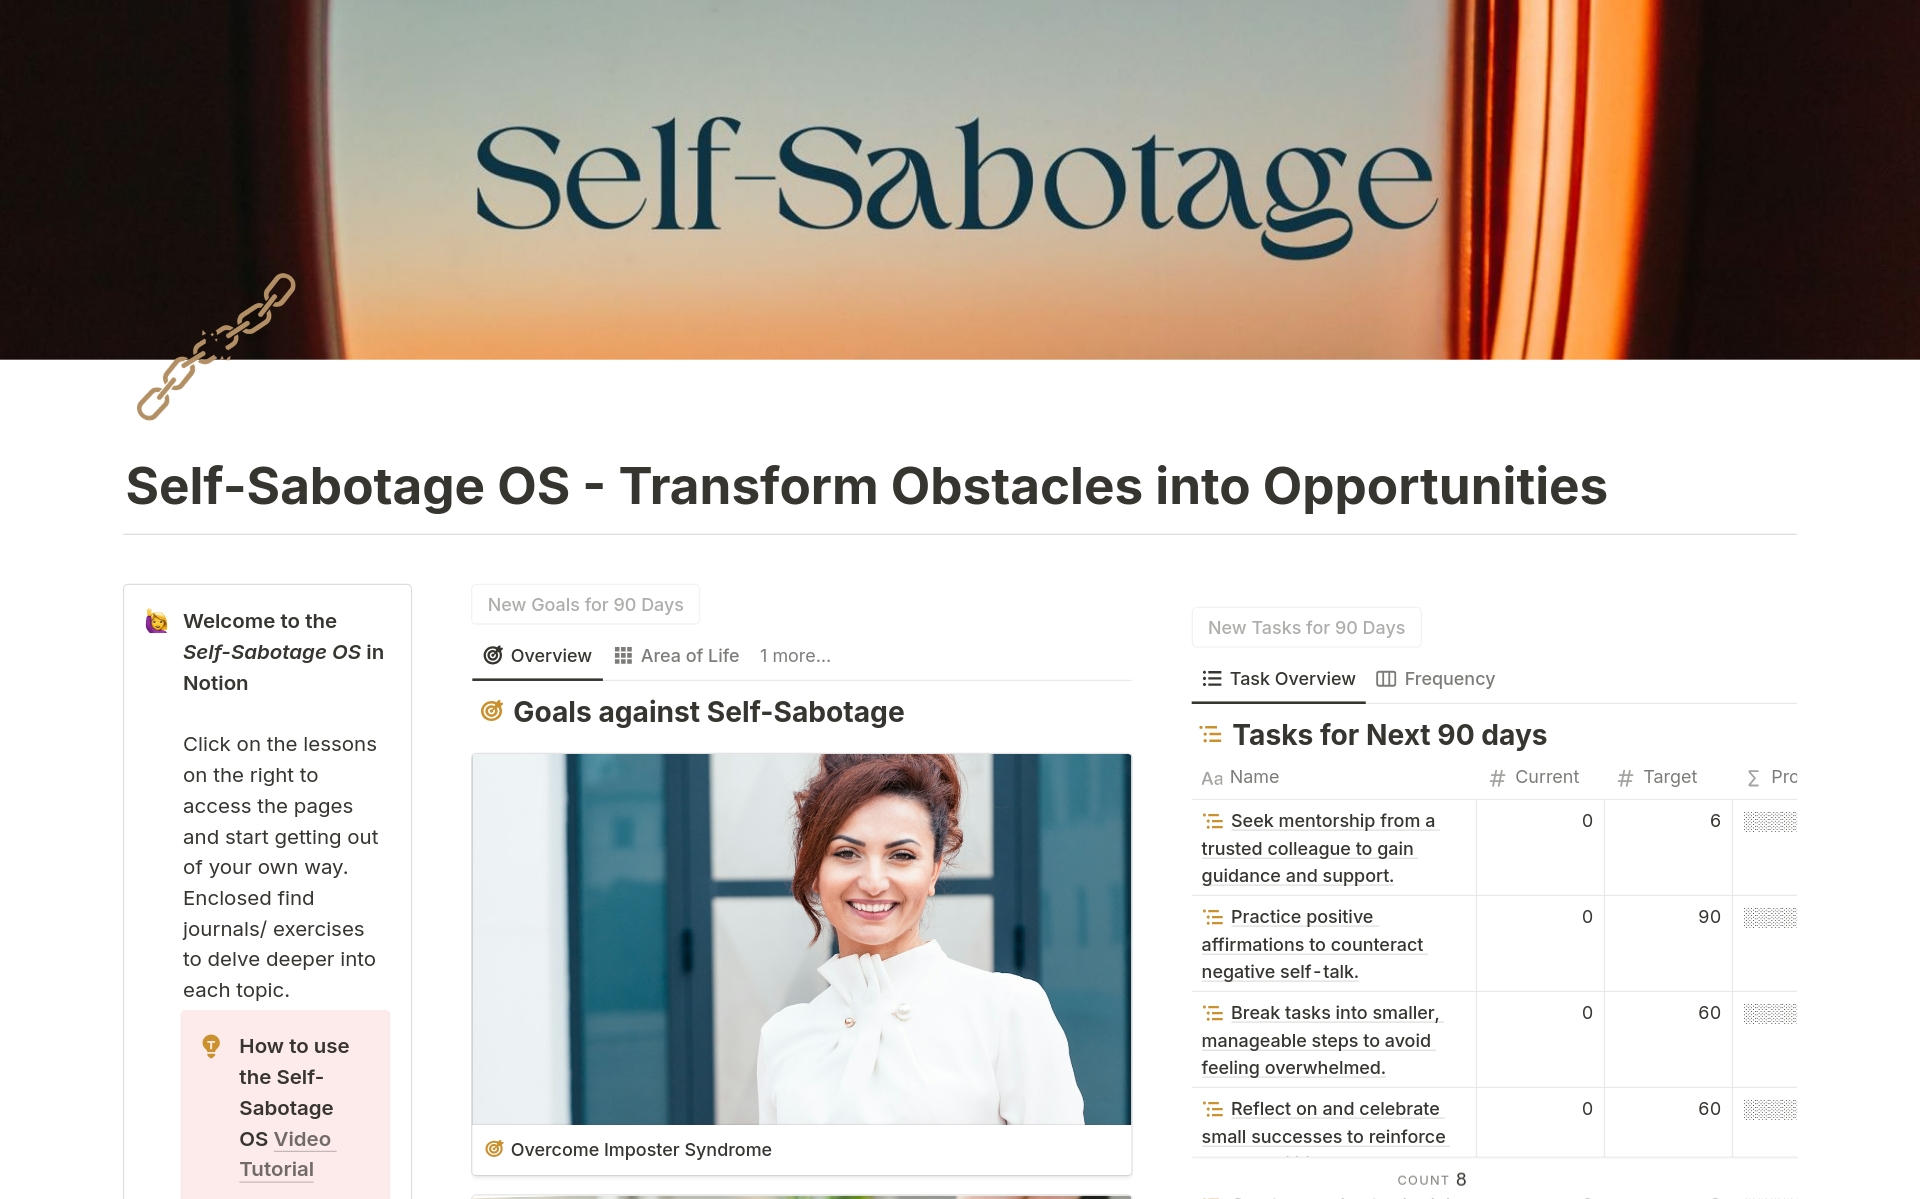 Stop Hitting Snooze on Your Dreams: All-in-one Notion Operating System to Fight Self Sabotage. The Self Sabotage OS is built to help you slay self-doubt and unleash your inner hero!